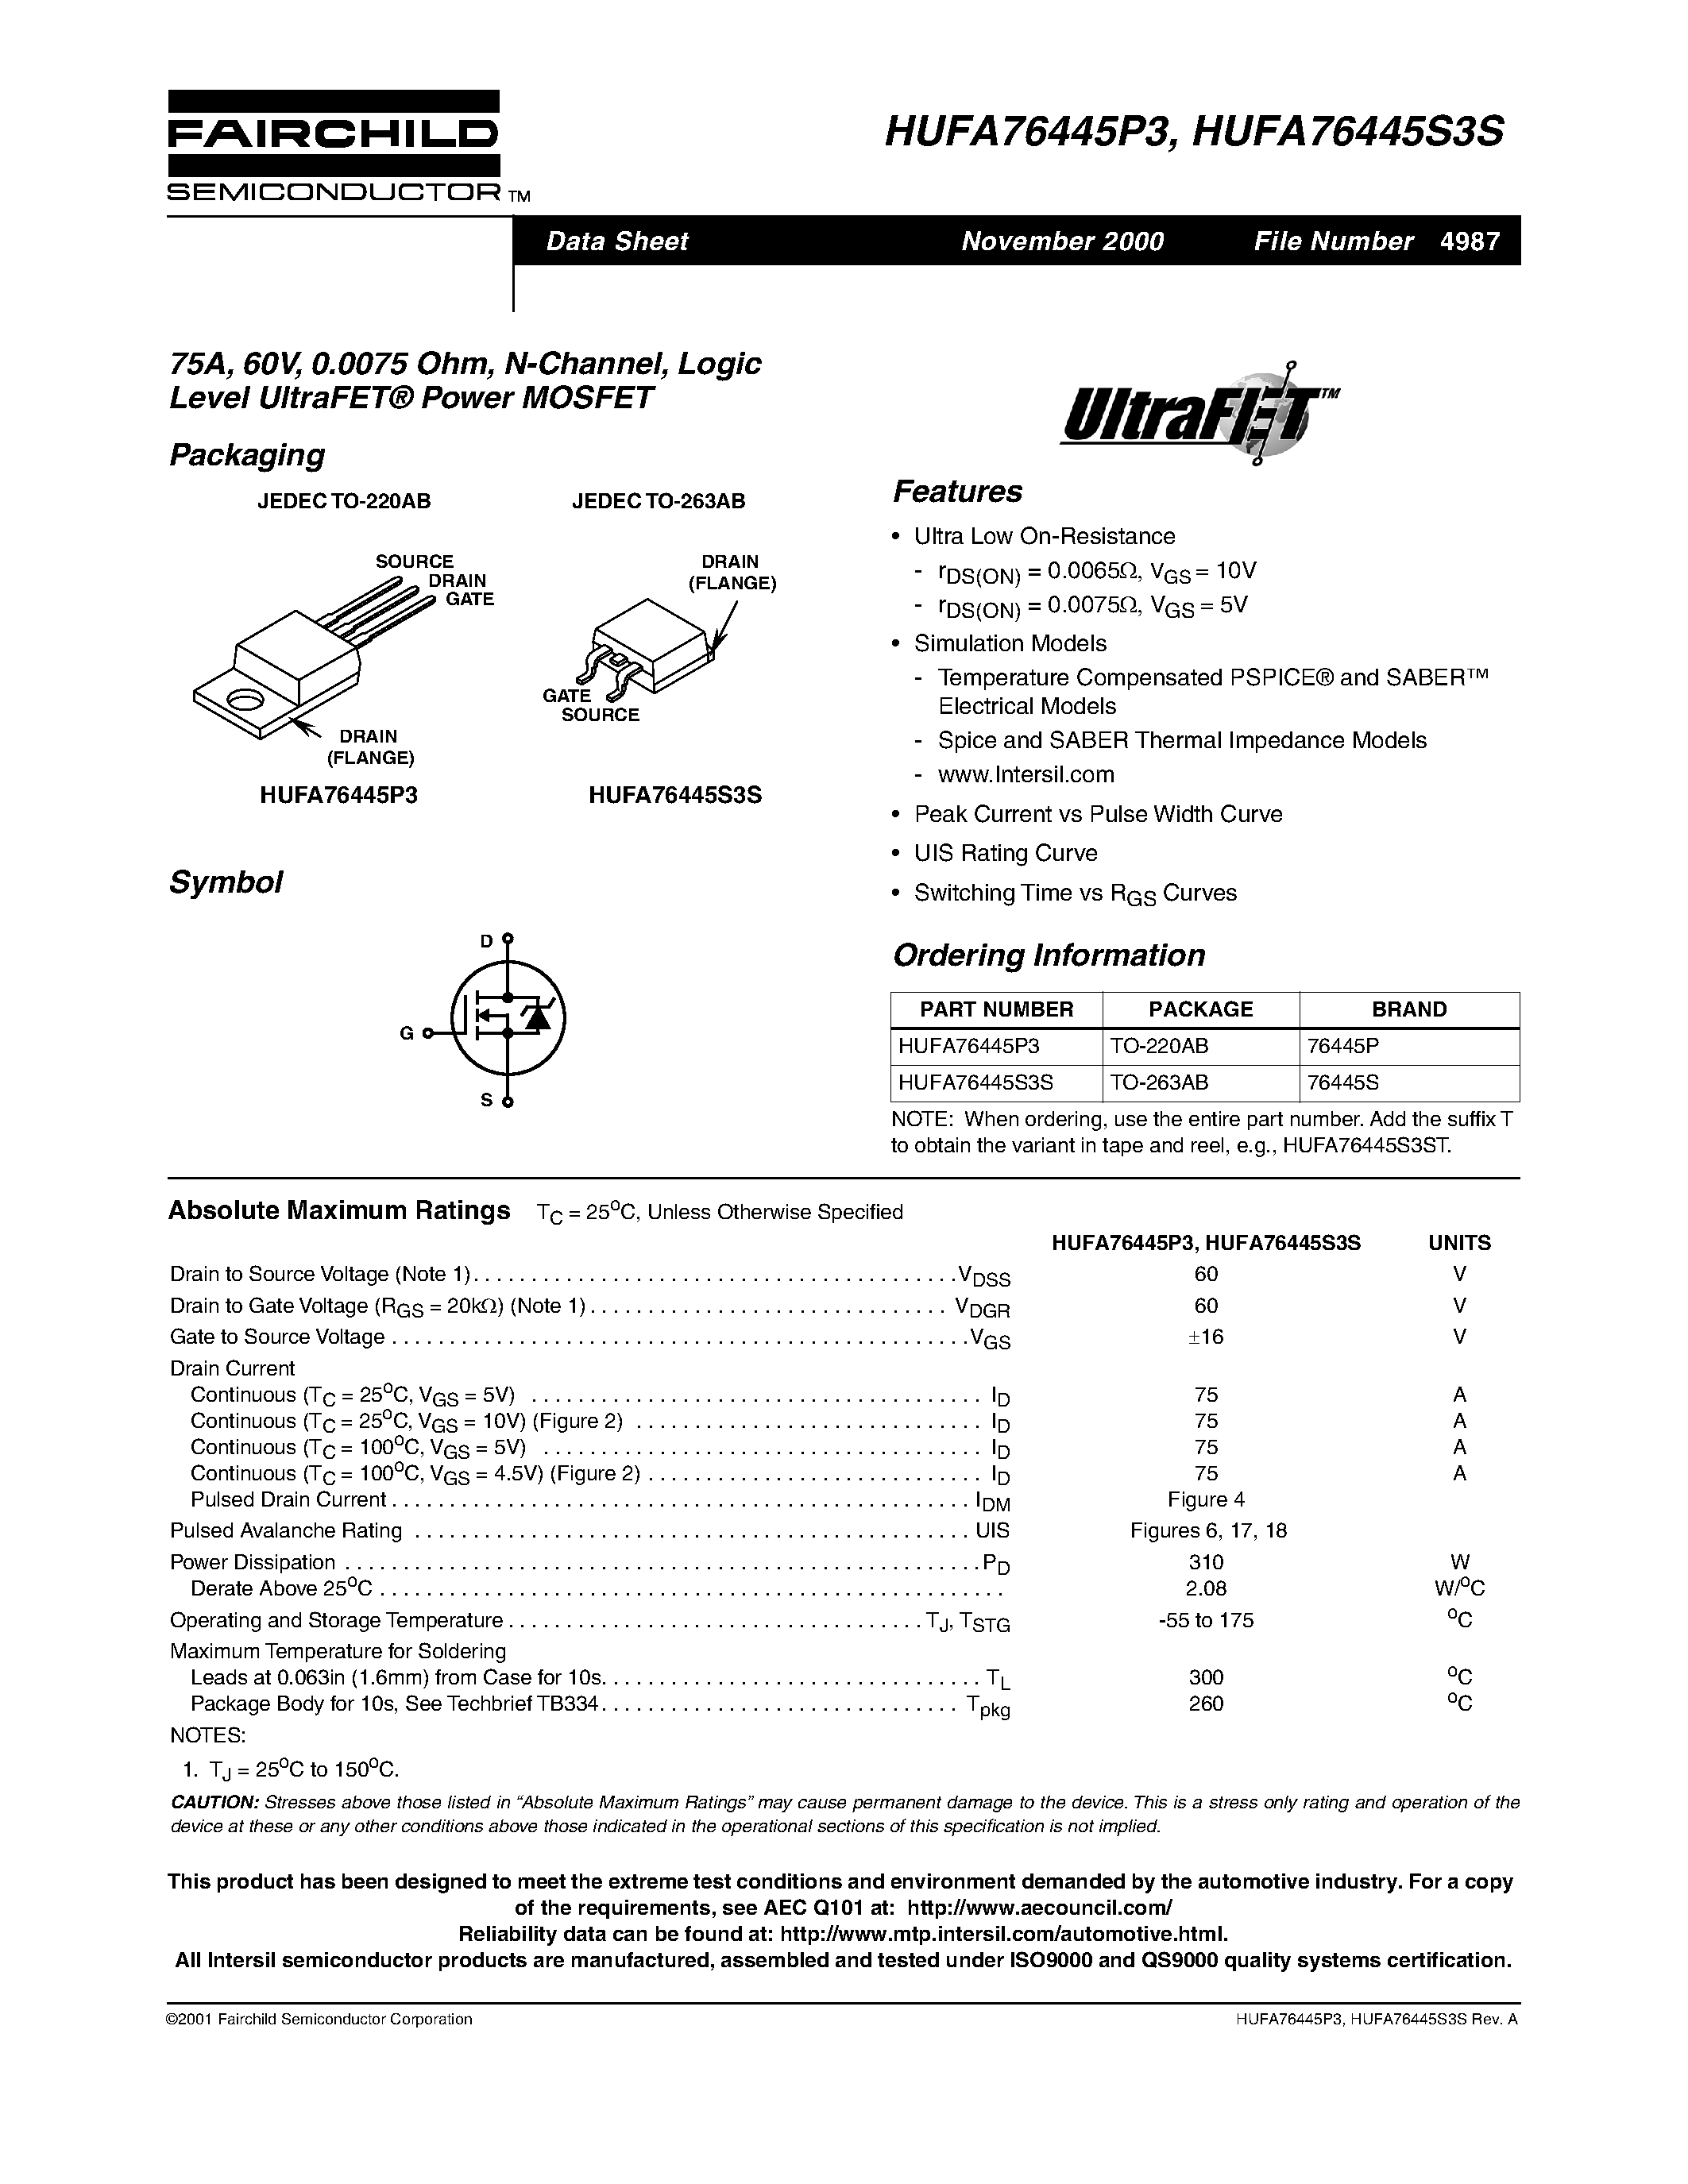 Datasheet HUFA76445S3S - 75A/ 60V/ 0.0075 Ohm/ N-Channel/ Logic Level UltraFET Power MOSFET page 1